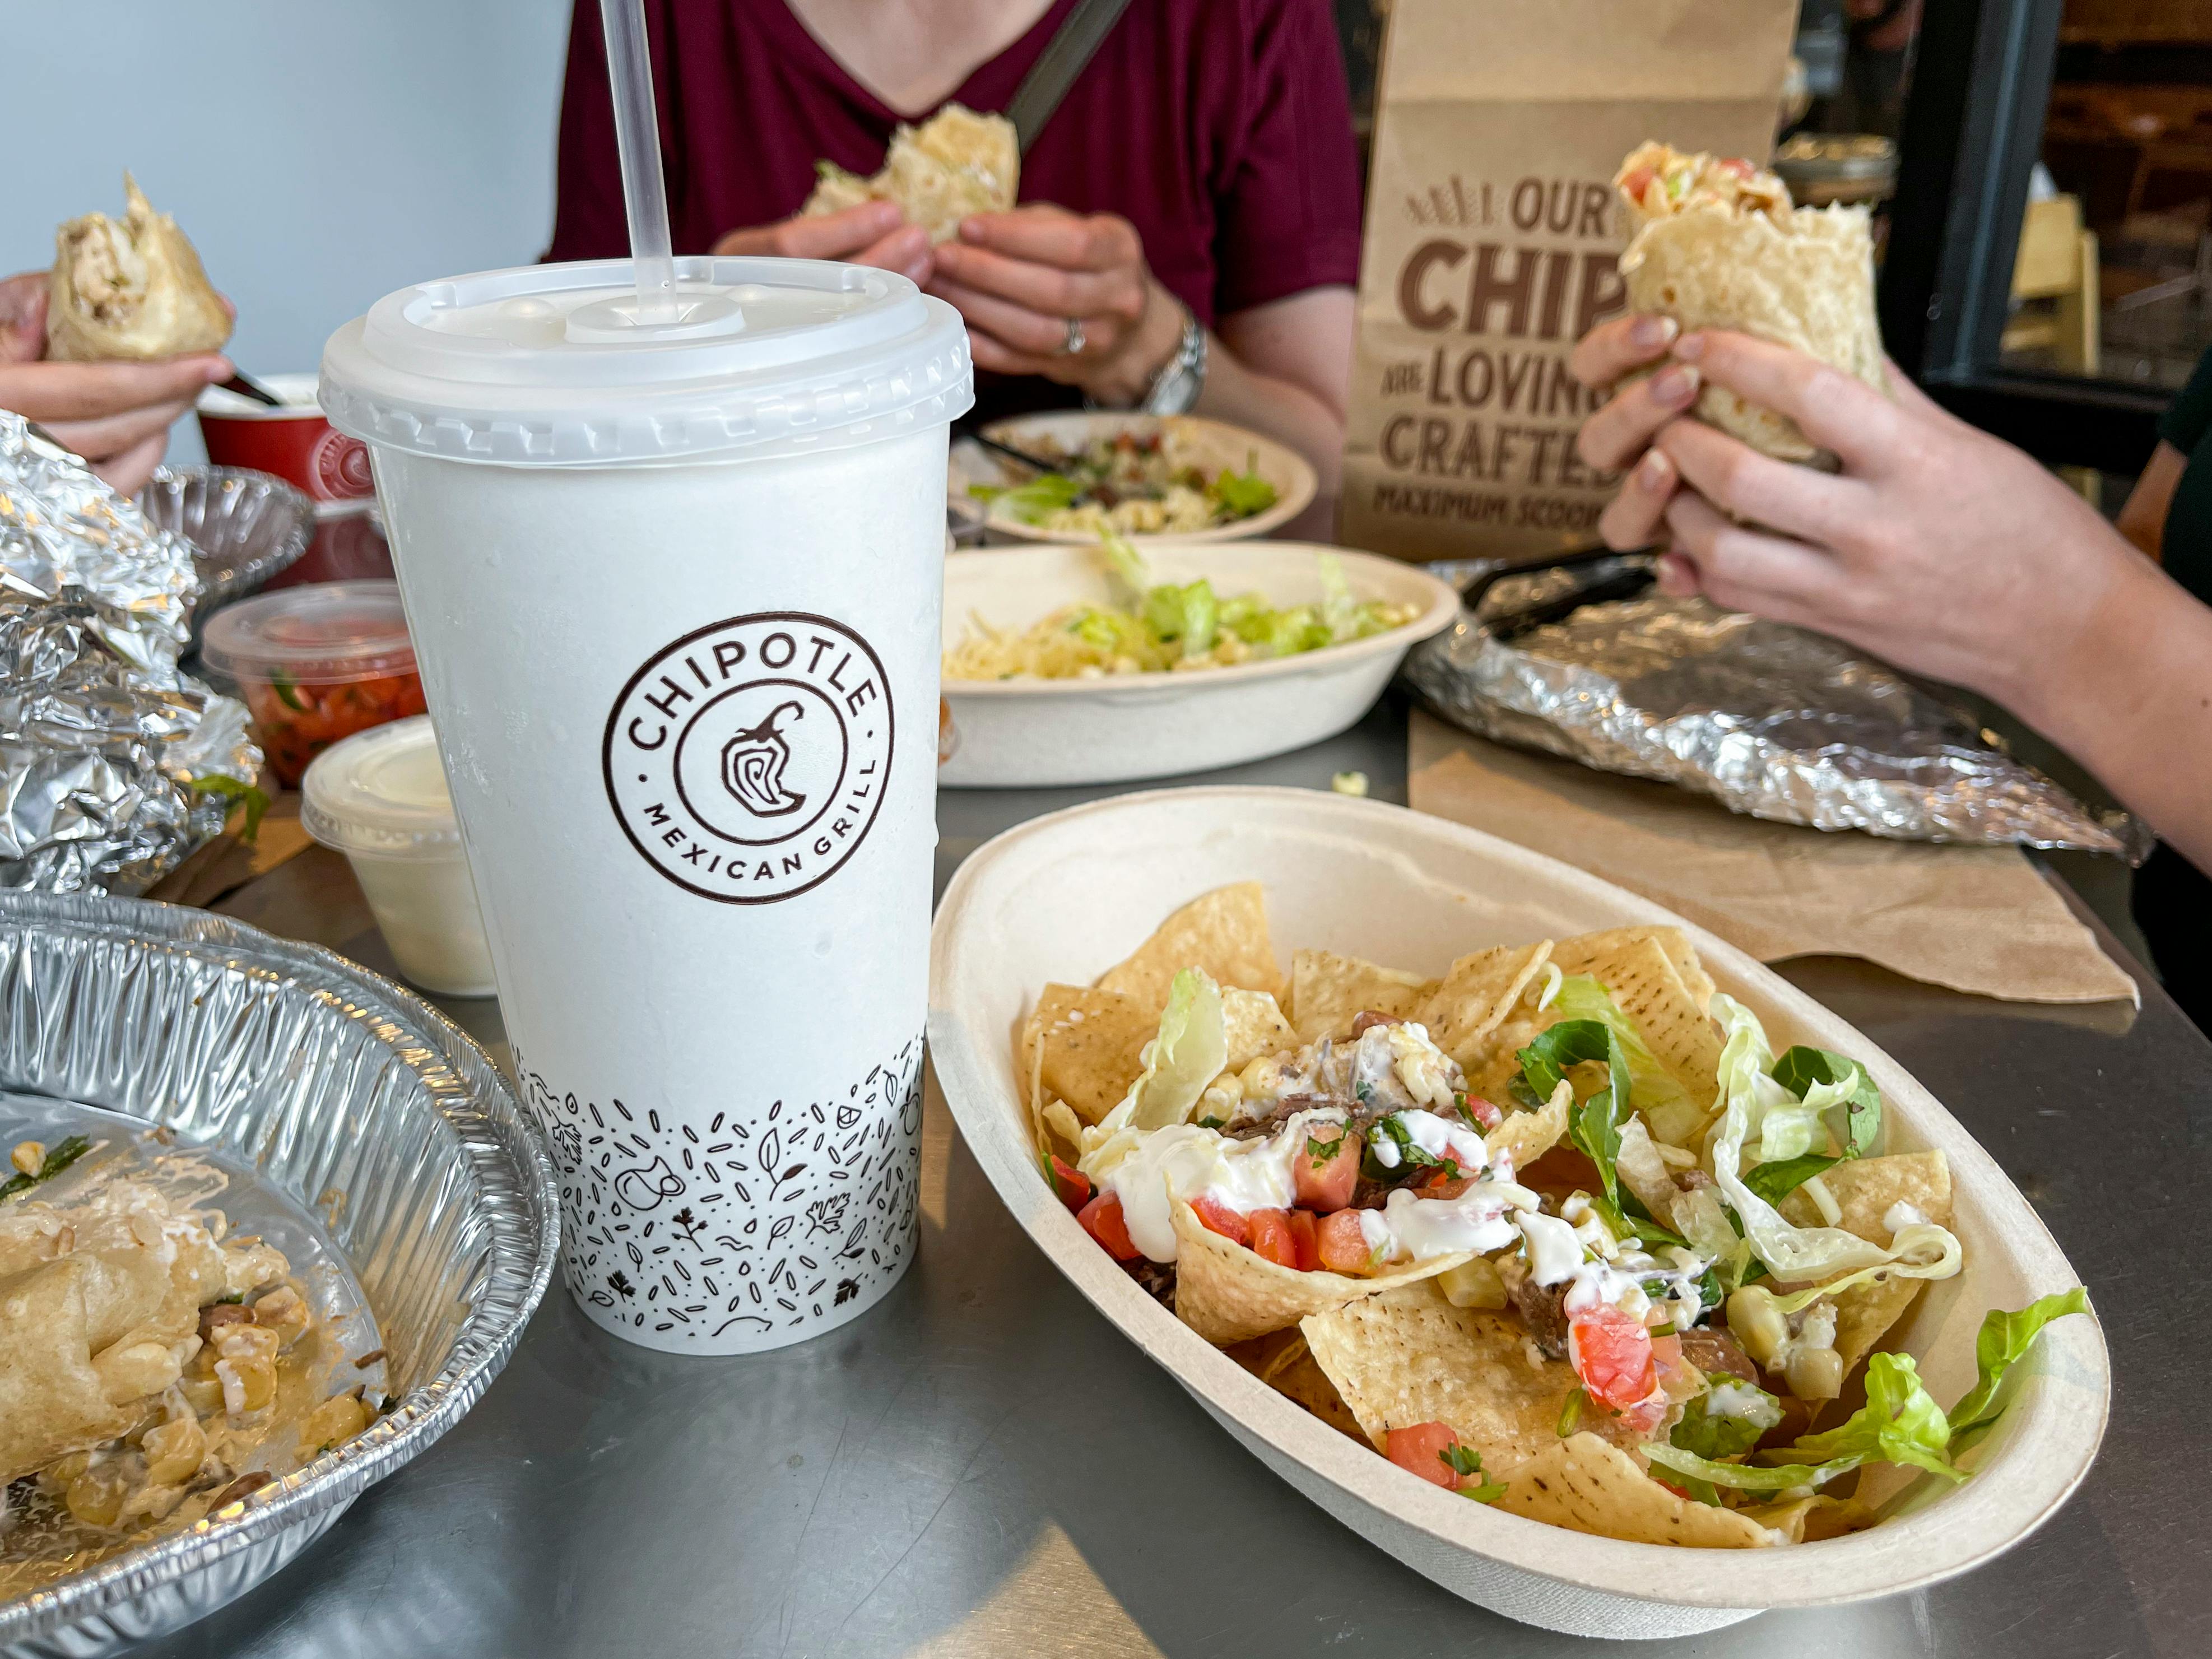 6 Chipotle Secret Menu Items You Have to Try - The Krazy Coupon Lady